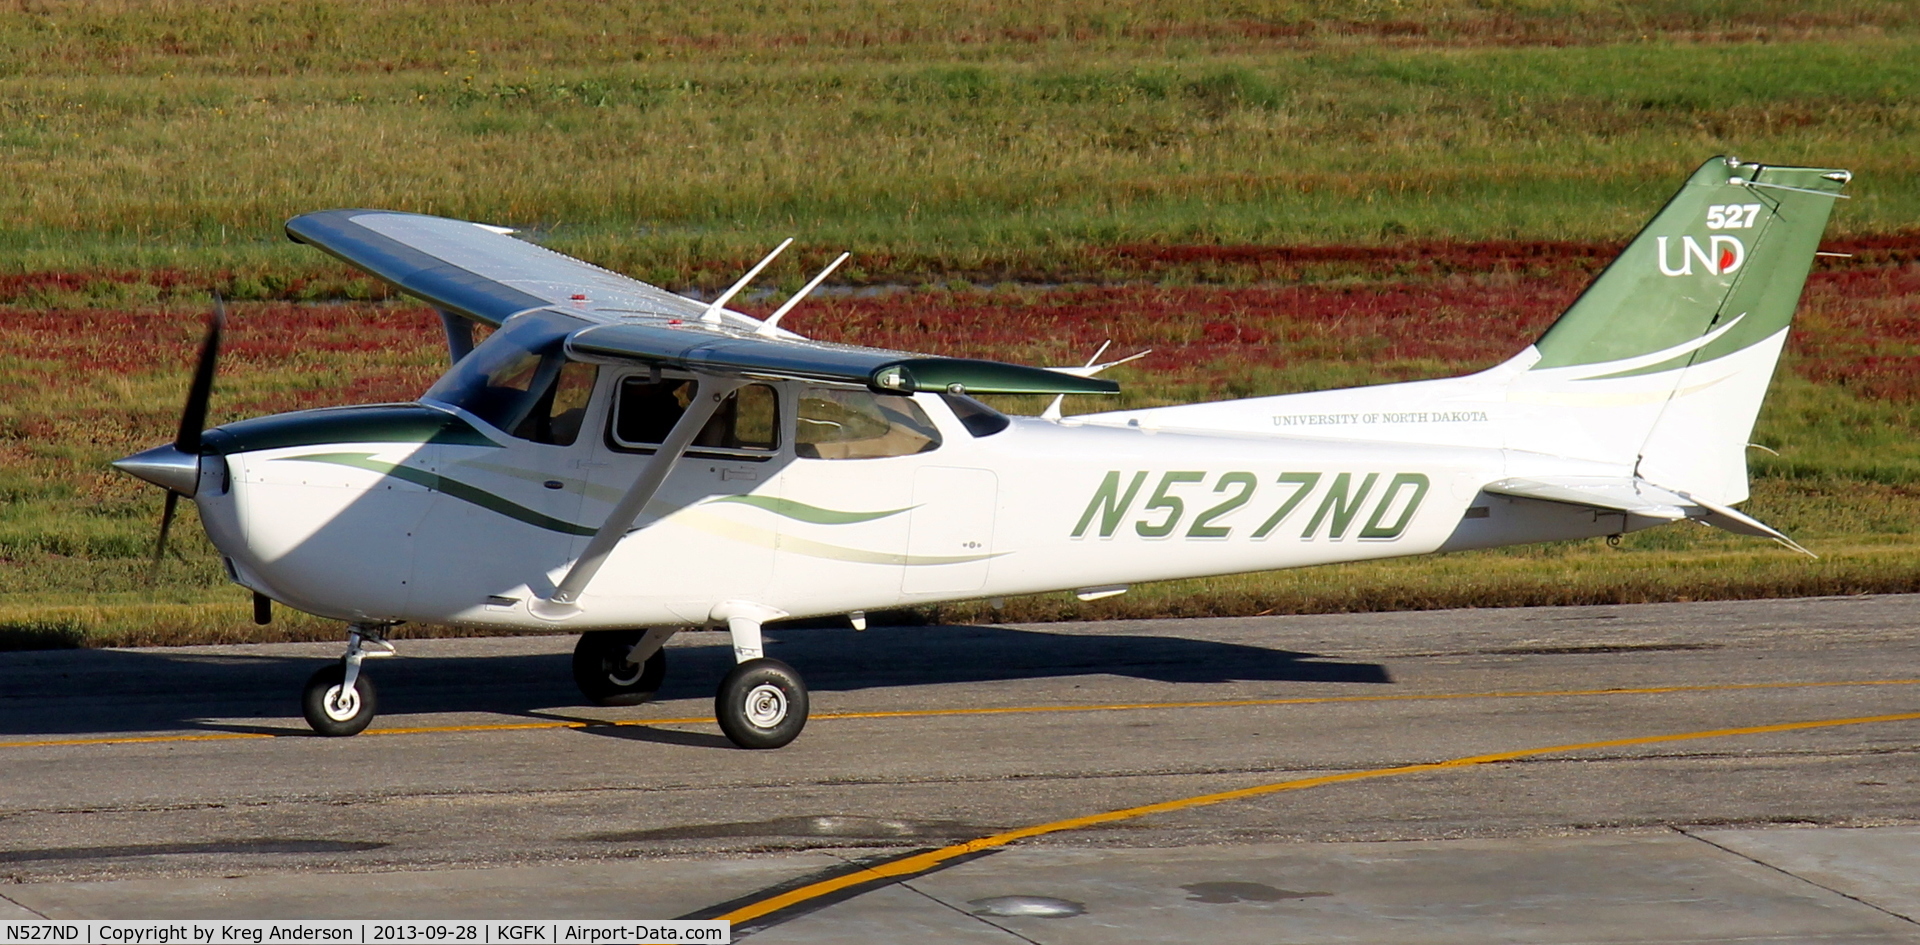 N527ND, 2008 Cessna 172S C/N 172S10818, University of North Dakota Cessna 172S Skyhawk taxiing from the Charlie ramp to the active runway.